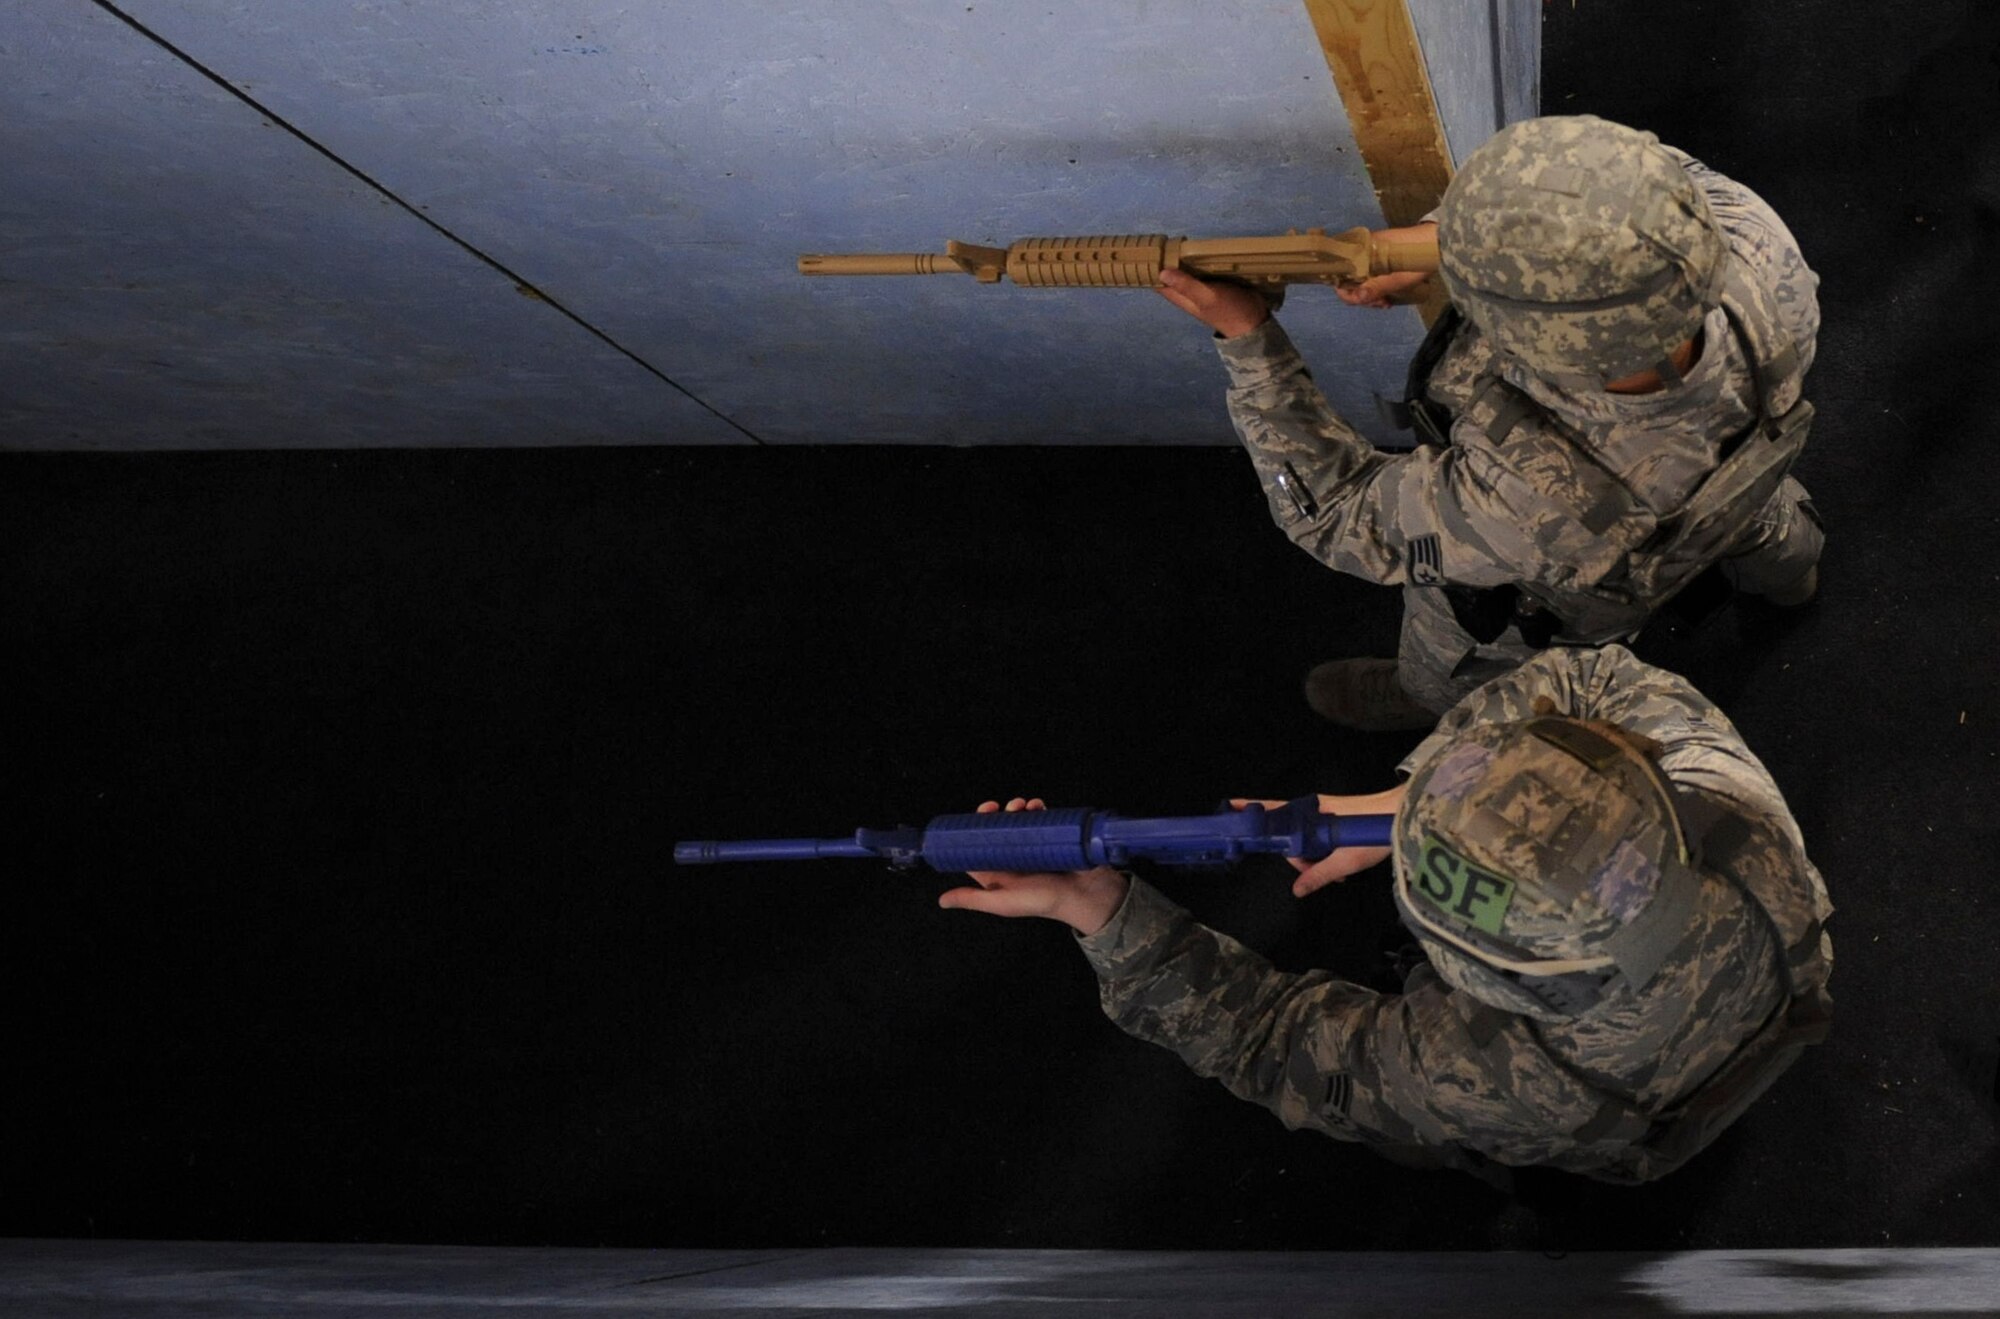 99th Security Forces Squadron Airmen clear rooms during a rescue scenario with fire protection in Area II on Nellis Air Force Base, Nev., May 17, 2017. Security forces members provide base defense and protection, and respond to scenarios ranging from routine traffic stops to active-shooter scenarios. (U.S. Air Force photo by Senior Airman Kevin Tanenbaum/Released)